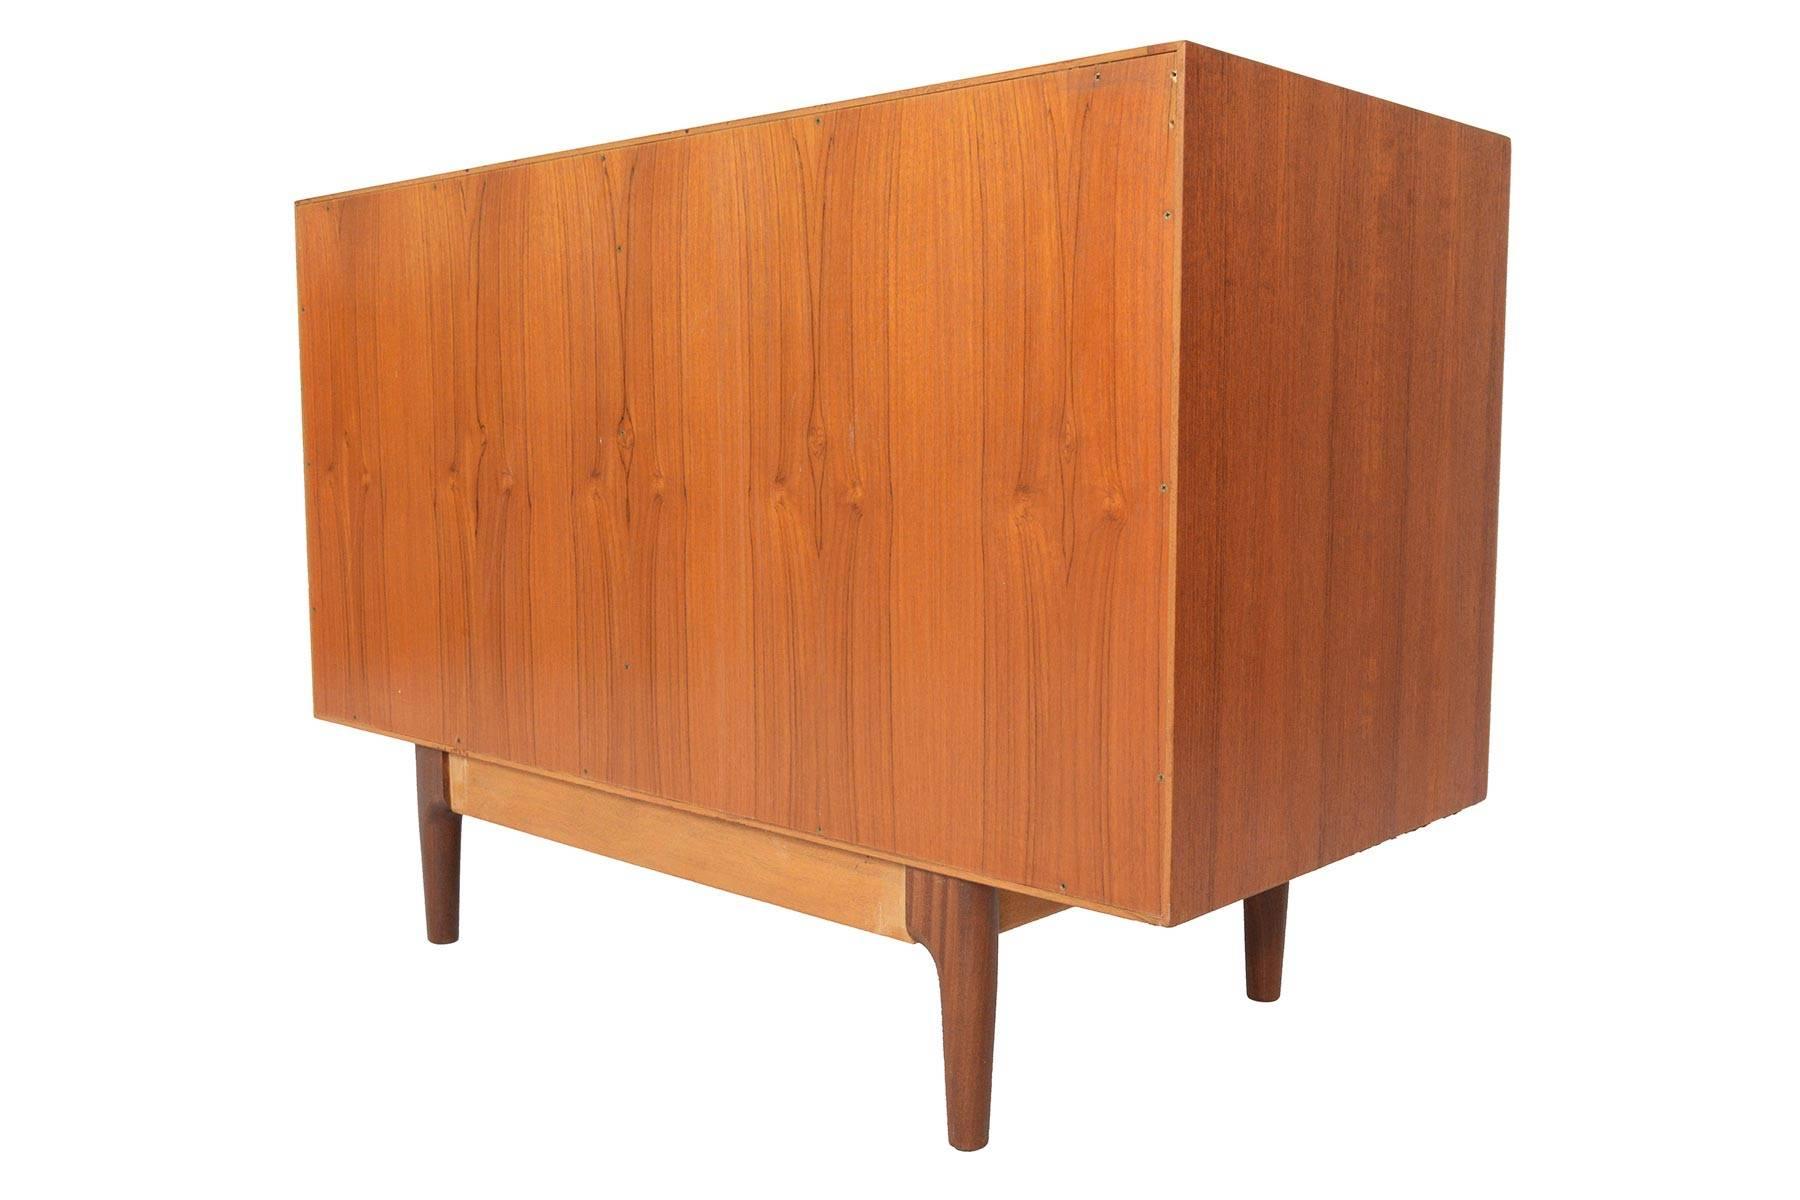 Small Refinished Teak Credenza by Ib Kofod Larsen for G Plan #3 3